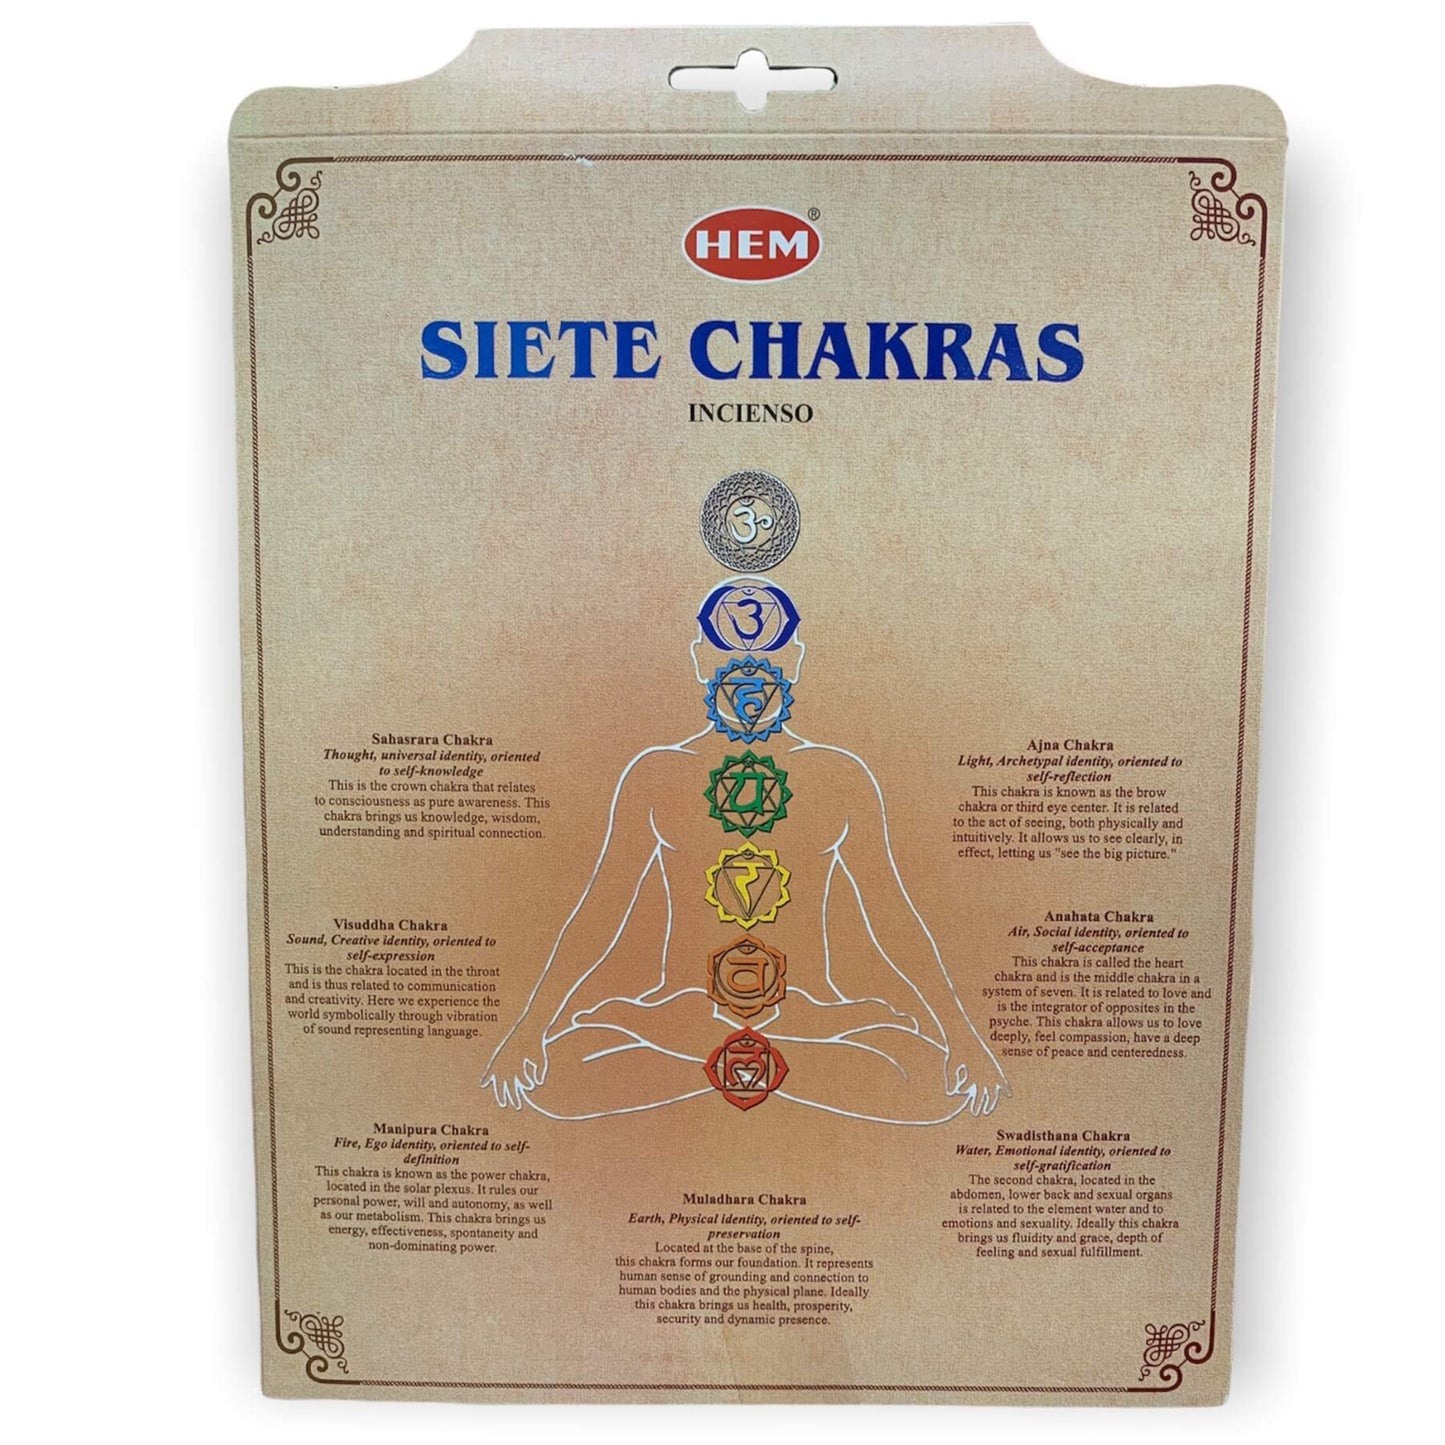 Shop Seven Chakras Incense with Deluxe Boxed Gift Set at Magic crystals. 7 Chakra Incense is perfect for people who meditate, practice yoga as it stimulates the body's energetic centers known as “chakras”. Free Shipping Available. Hem is known throughout the world for producing traditional incenses.